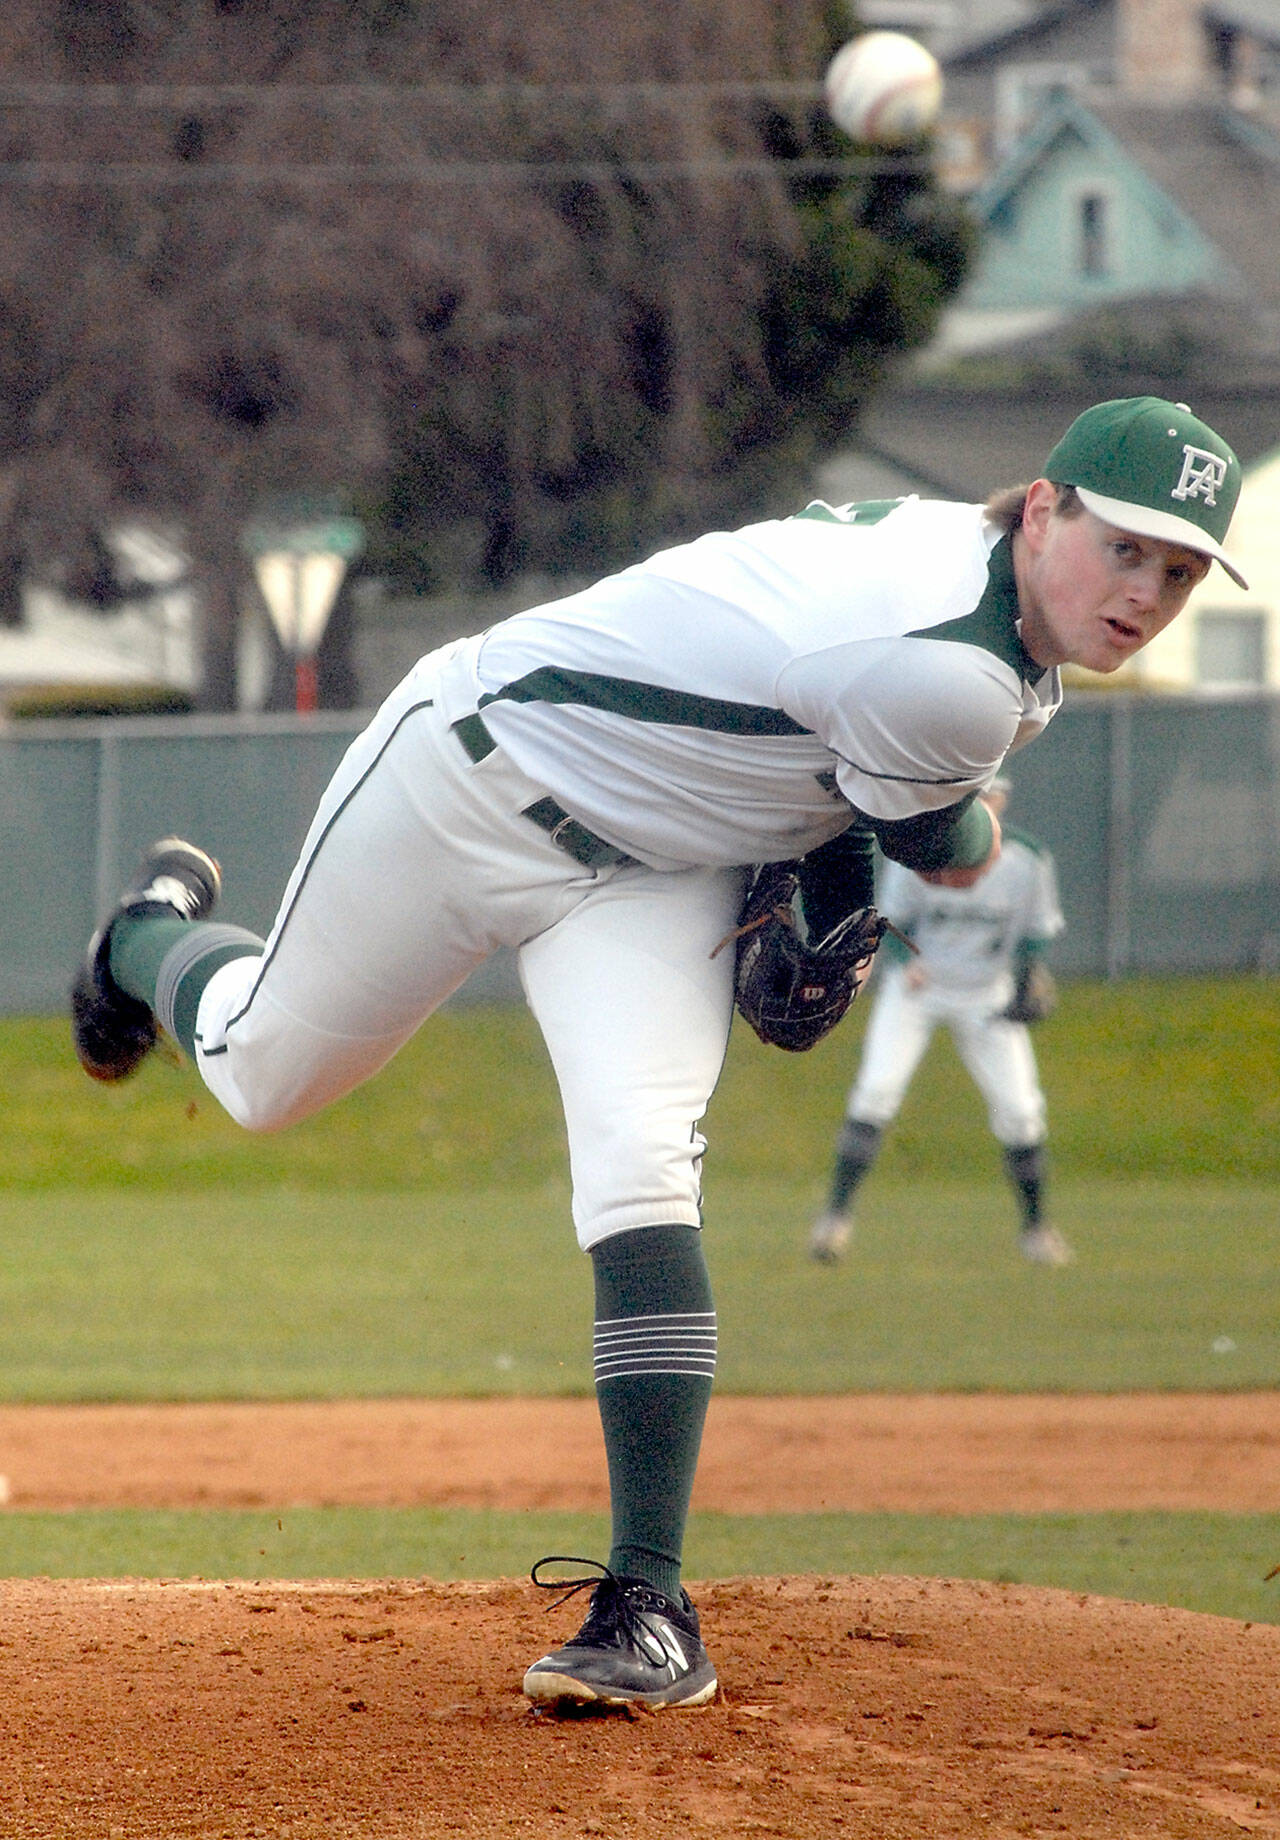 Port Angeles pitcher Elijah Flodstrom throws in the first inning against Bremerton on Tuesday at Port Angeles Civic Field. Flodstrom started the game and was part of a staff no-hitter in a 10-0 win. (Keith Thorpe/Peninsula Daily News)